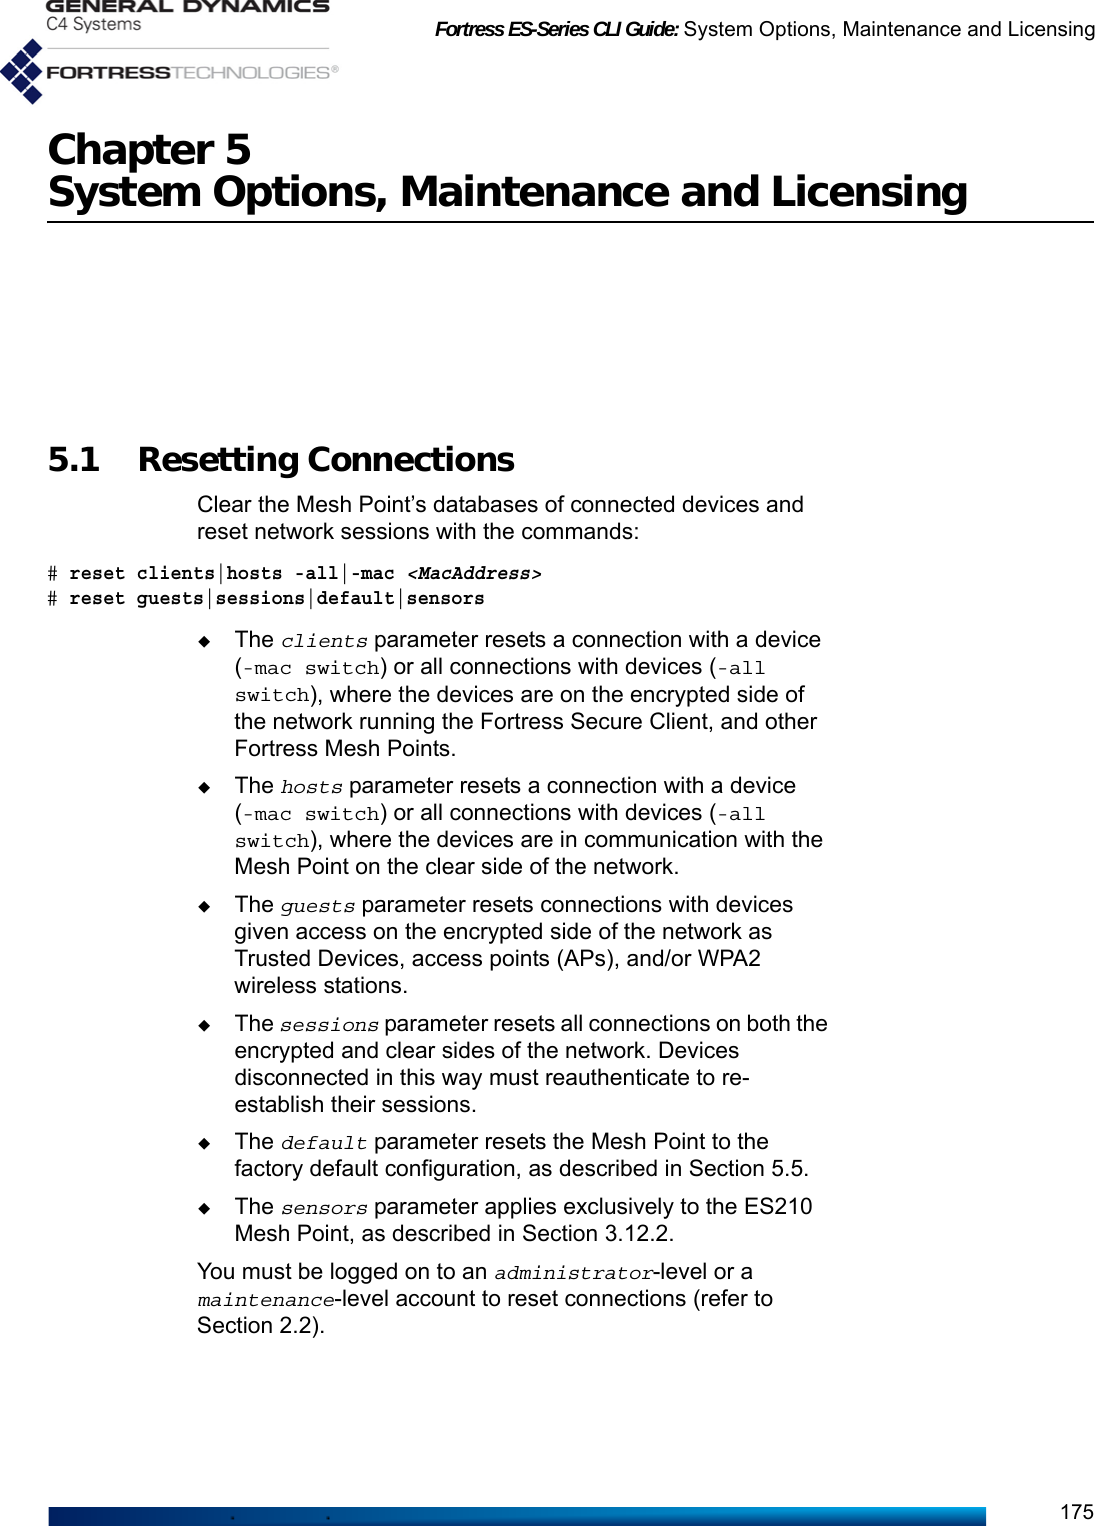 Fortress ES-Series CLI Guide: System Options, Maintenance and Licensing175Chapter 5System Options, Maintenance and Licensing5.1 Resetting Connections Clear the Mesh Point’s databases of connected devices and reset network sessions with the commands:# reset clients|hosts -all|-mac &lt;MacAddress&gt;# reset guests|sessions|default|sensorsThe clients parameter resets a connection with a device (-mac switch) or all connections with devices (-all switch), where the devices are on the encrypted side of the network running the Fortress Secure Client, and other Fortress Mesh Points.The hosts parameter resets a connection with a device (-mac switch) or all connections with devices (-all switch), where the devices are in communication with the Mesh Point on the clear side of the network.The guests parameter resets connections with devices given access on the encrypted side of the network as Trusted Devices, access points (APs), and/or WPA2 wireless stations.The sessions parameter resets all connections on both the encrypted and clear sides of the network. Devices disconnected in this way must reauthenticate to re-establish their sessions. The default parameter resets the Mesh Point to the factory default configuration, as described in Section 5.5.The sensors parameter applies exclusively to the ES210 Mesh Point, as described in Section 3.12.2.You must be logged on to an administrator-level or a maintenance-level account to reset connections (refer to Section 2.2).